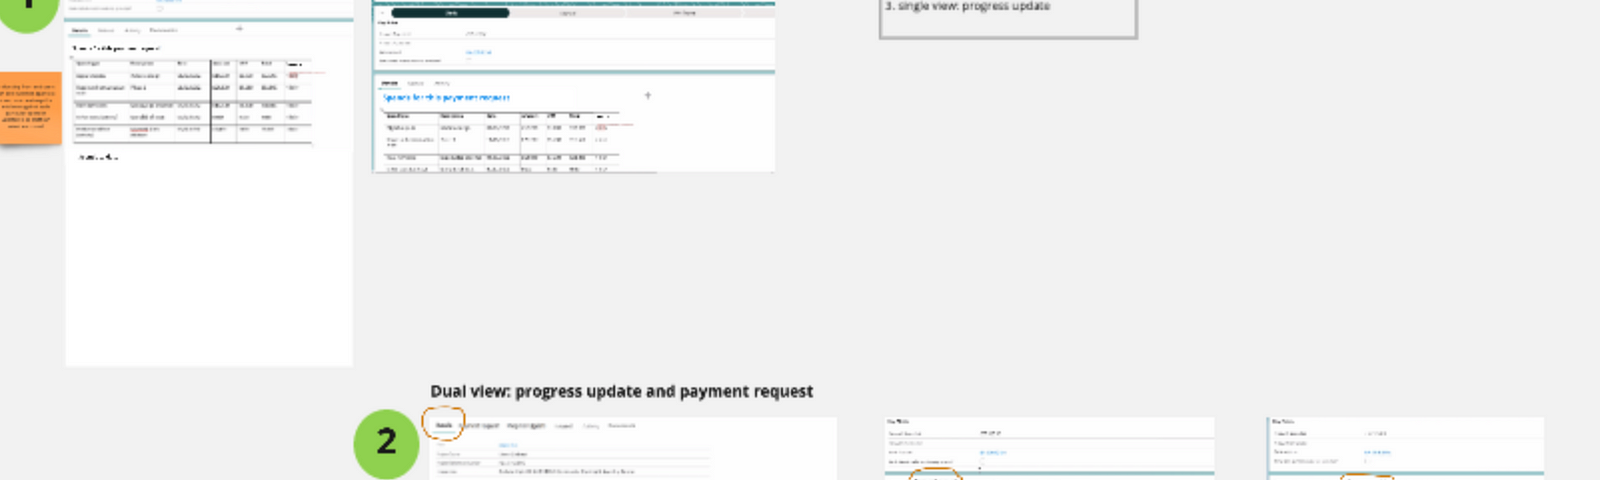 Sketches of 3 ideas of how staff might see the payment request and progress report in Salesforce